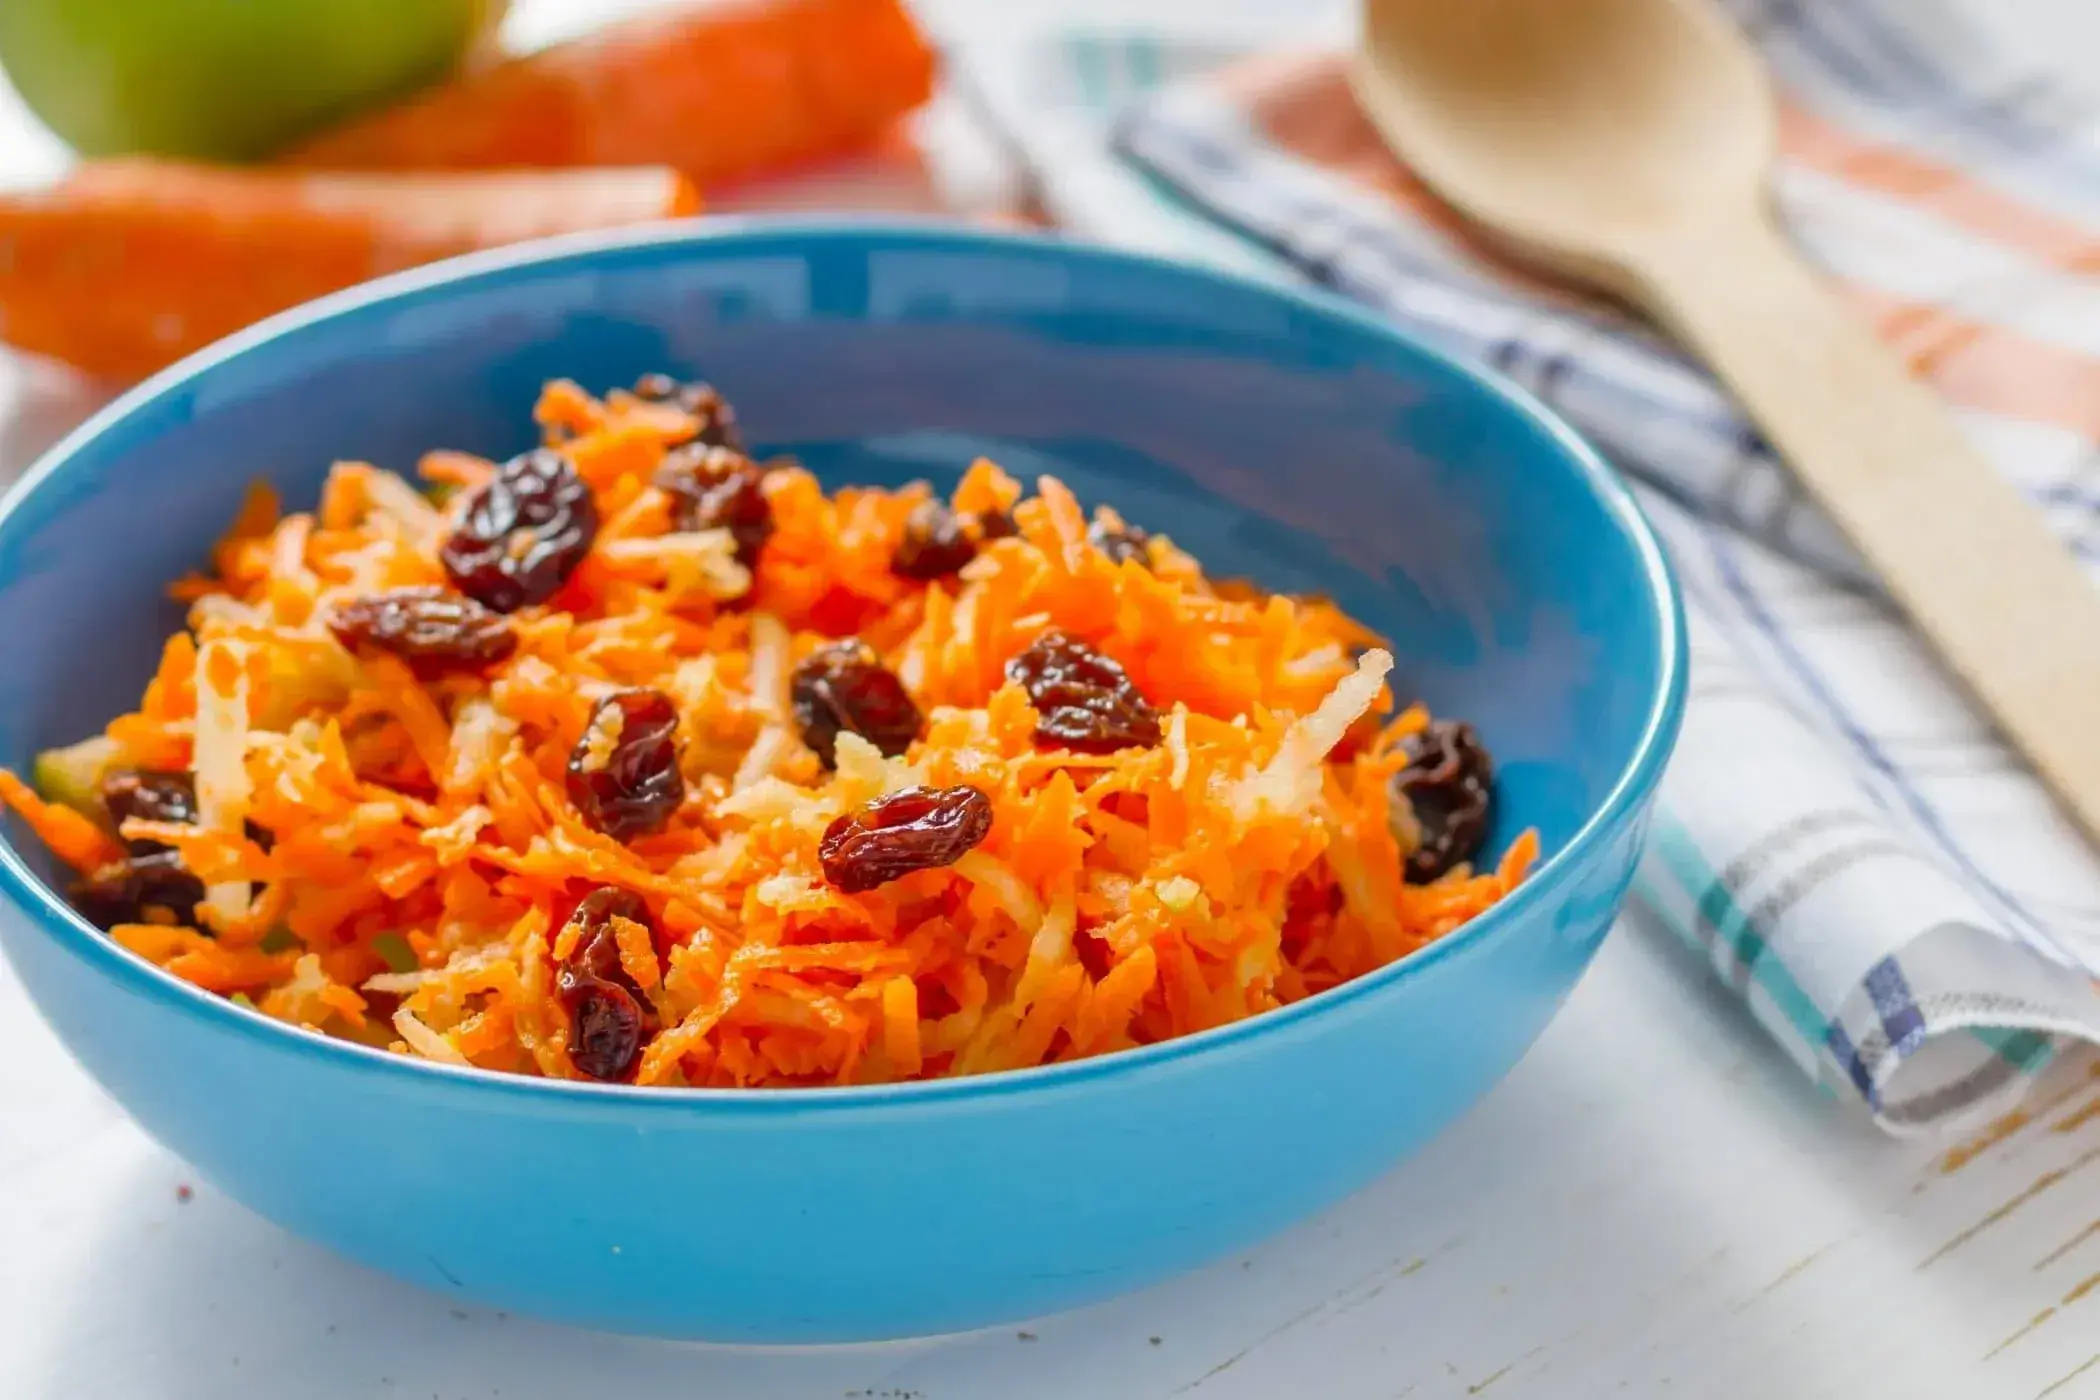 Moroccan grated carrotsimage